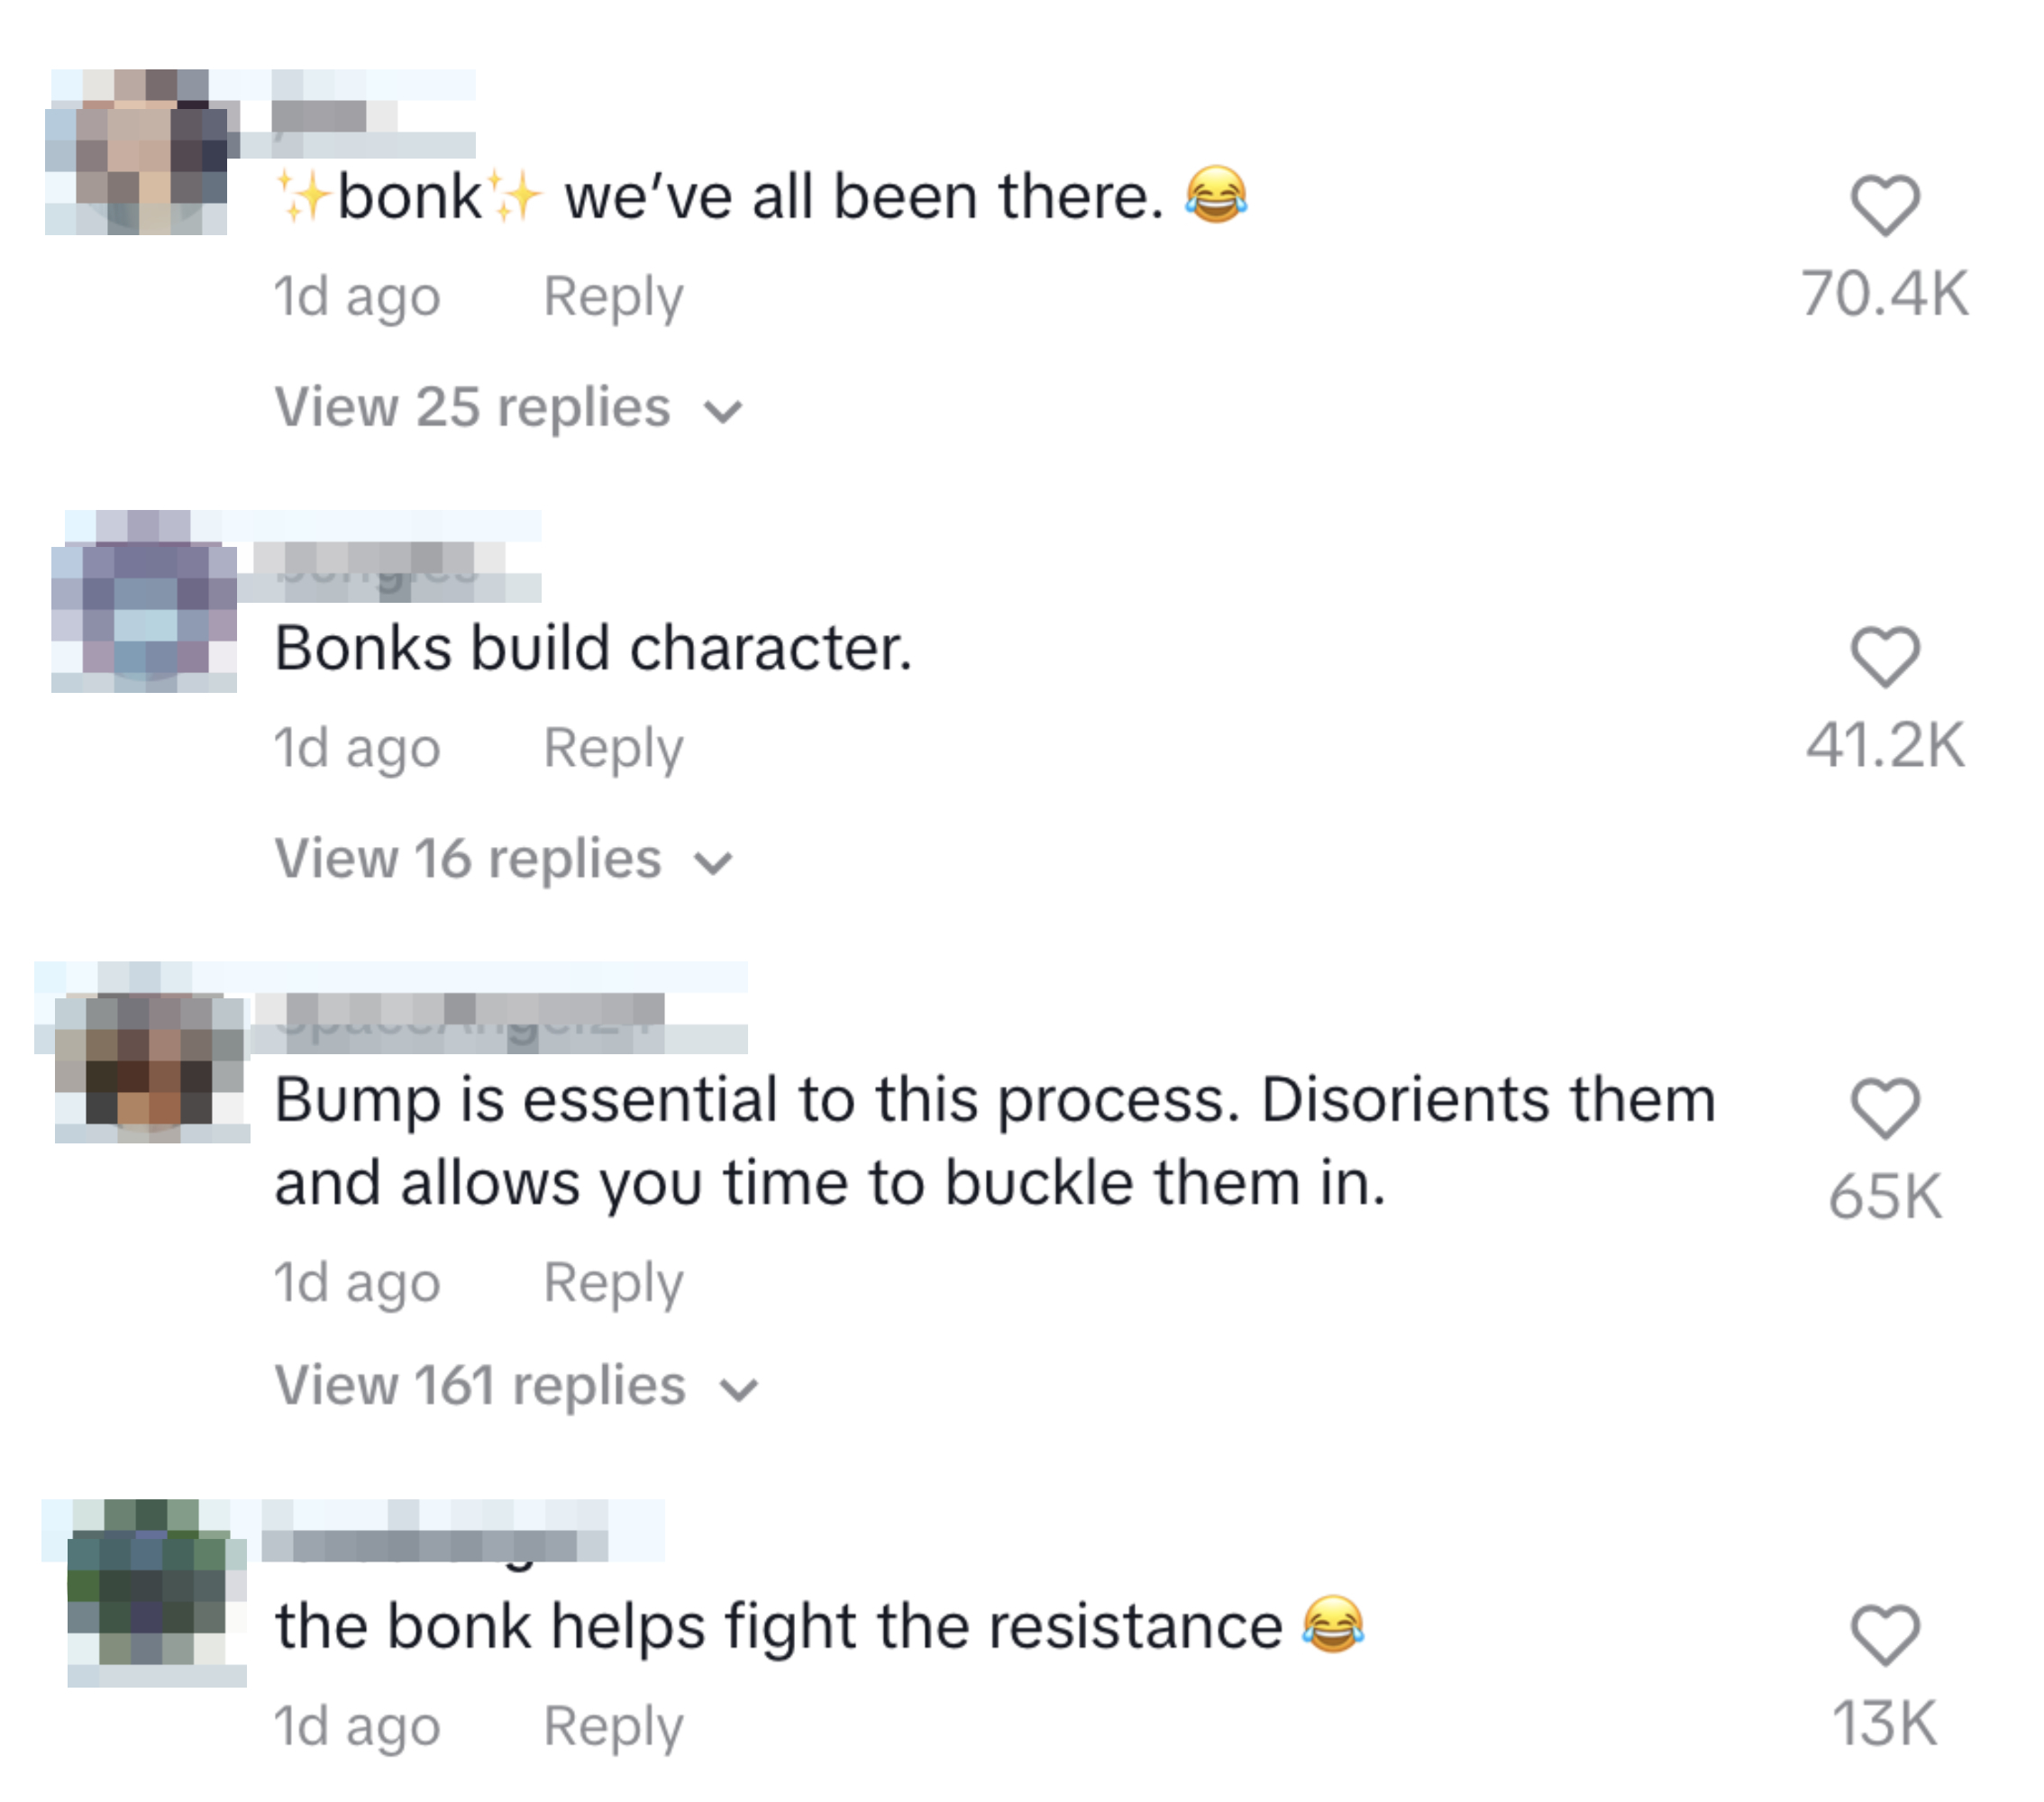 Screenshot of social media comments with emoji reactions, discussing humorous takes on personal growth through challenges, like &quot;Bonks build character&quot; and &quot;the bonk helps fight the resistance&quot;